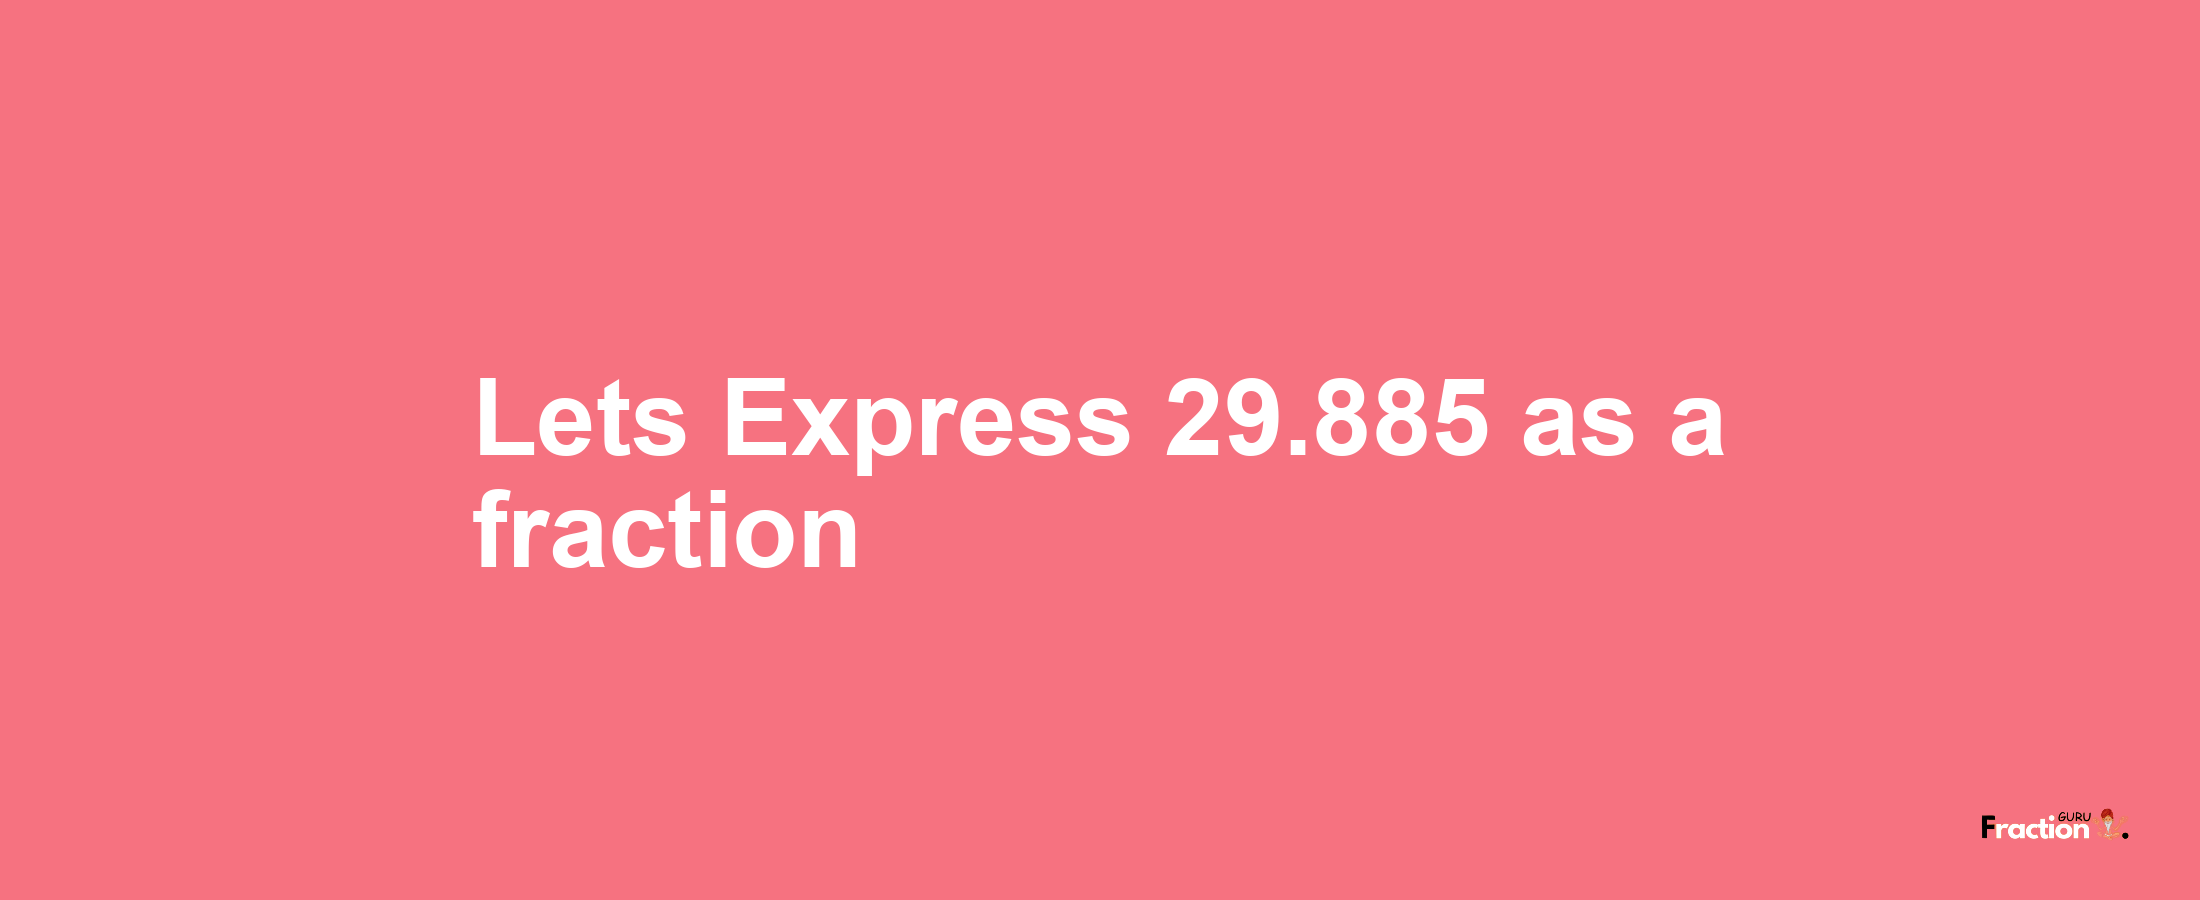 Lets Express 29.885 as afraction